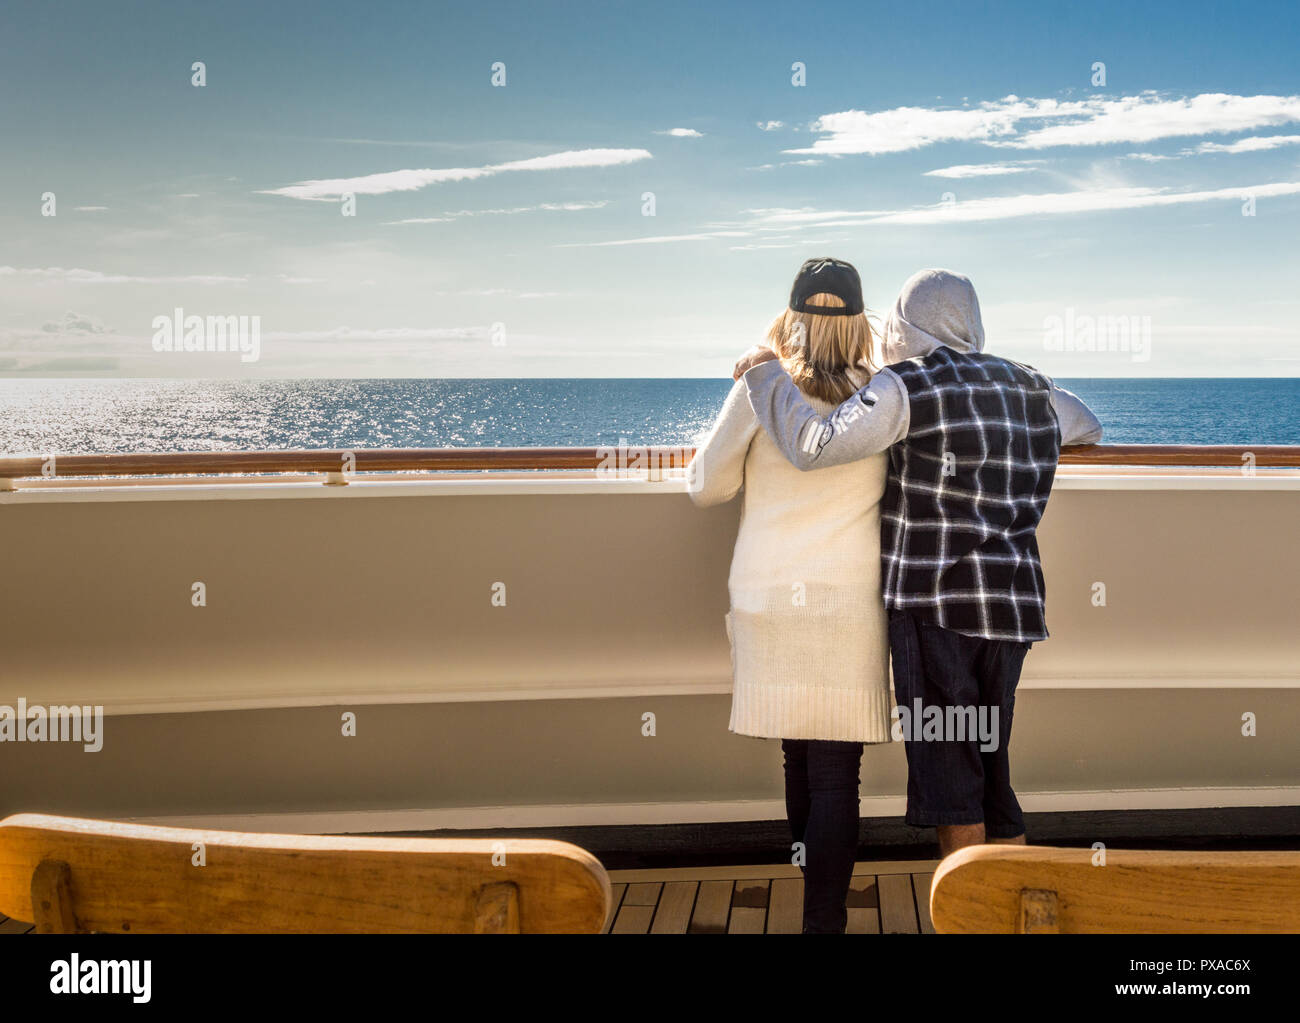 Casually dressed couple on Alaskan Inside Passage cruise looking out to open ocean from a sunlit exterior ship deck. Stock Photo